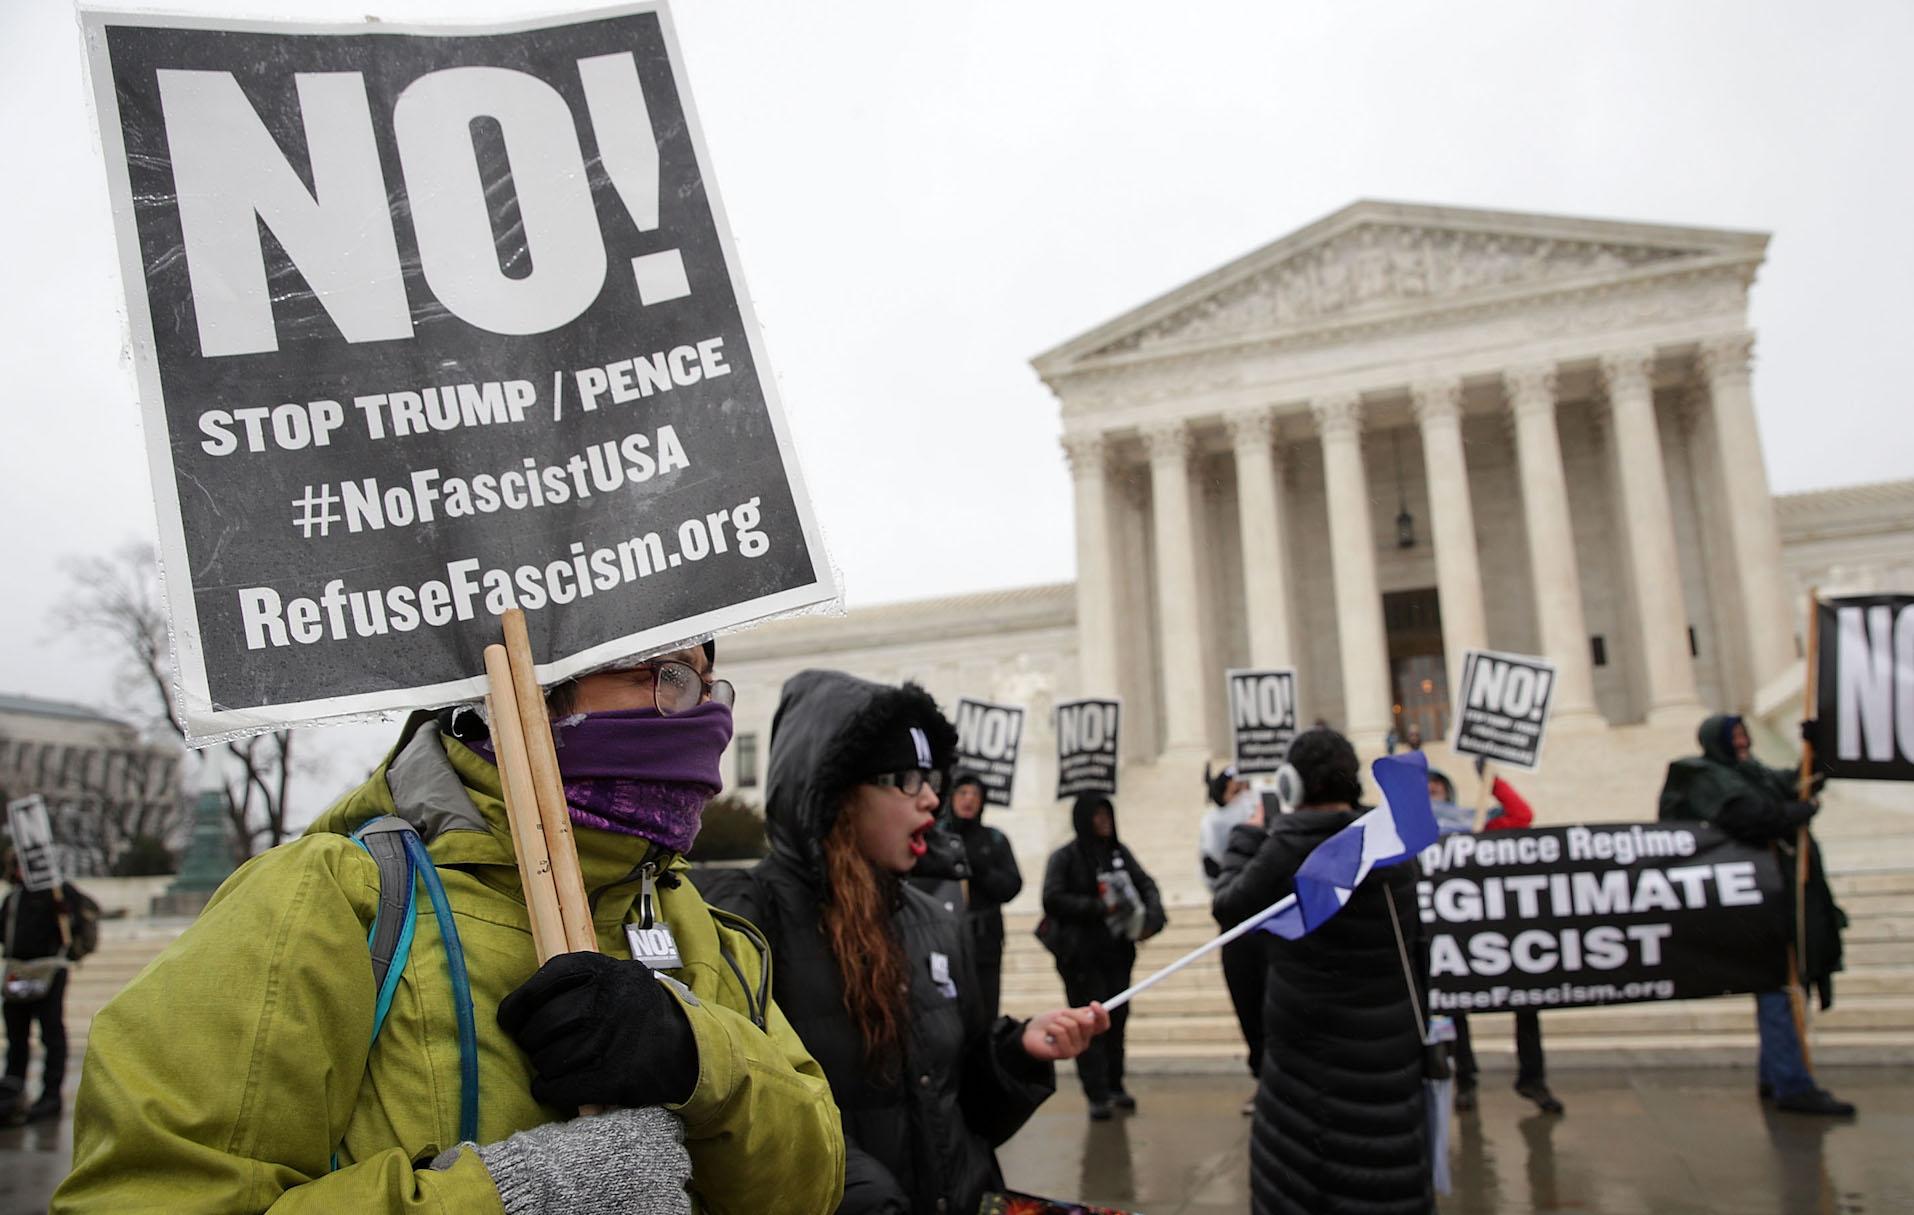 Activists stage an anti-Trump protest in front of the U.S. Supreme Court January 23, 2017 in Washington, DC.